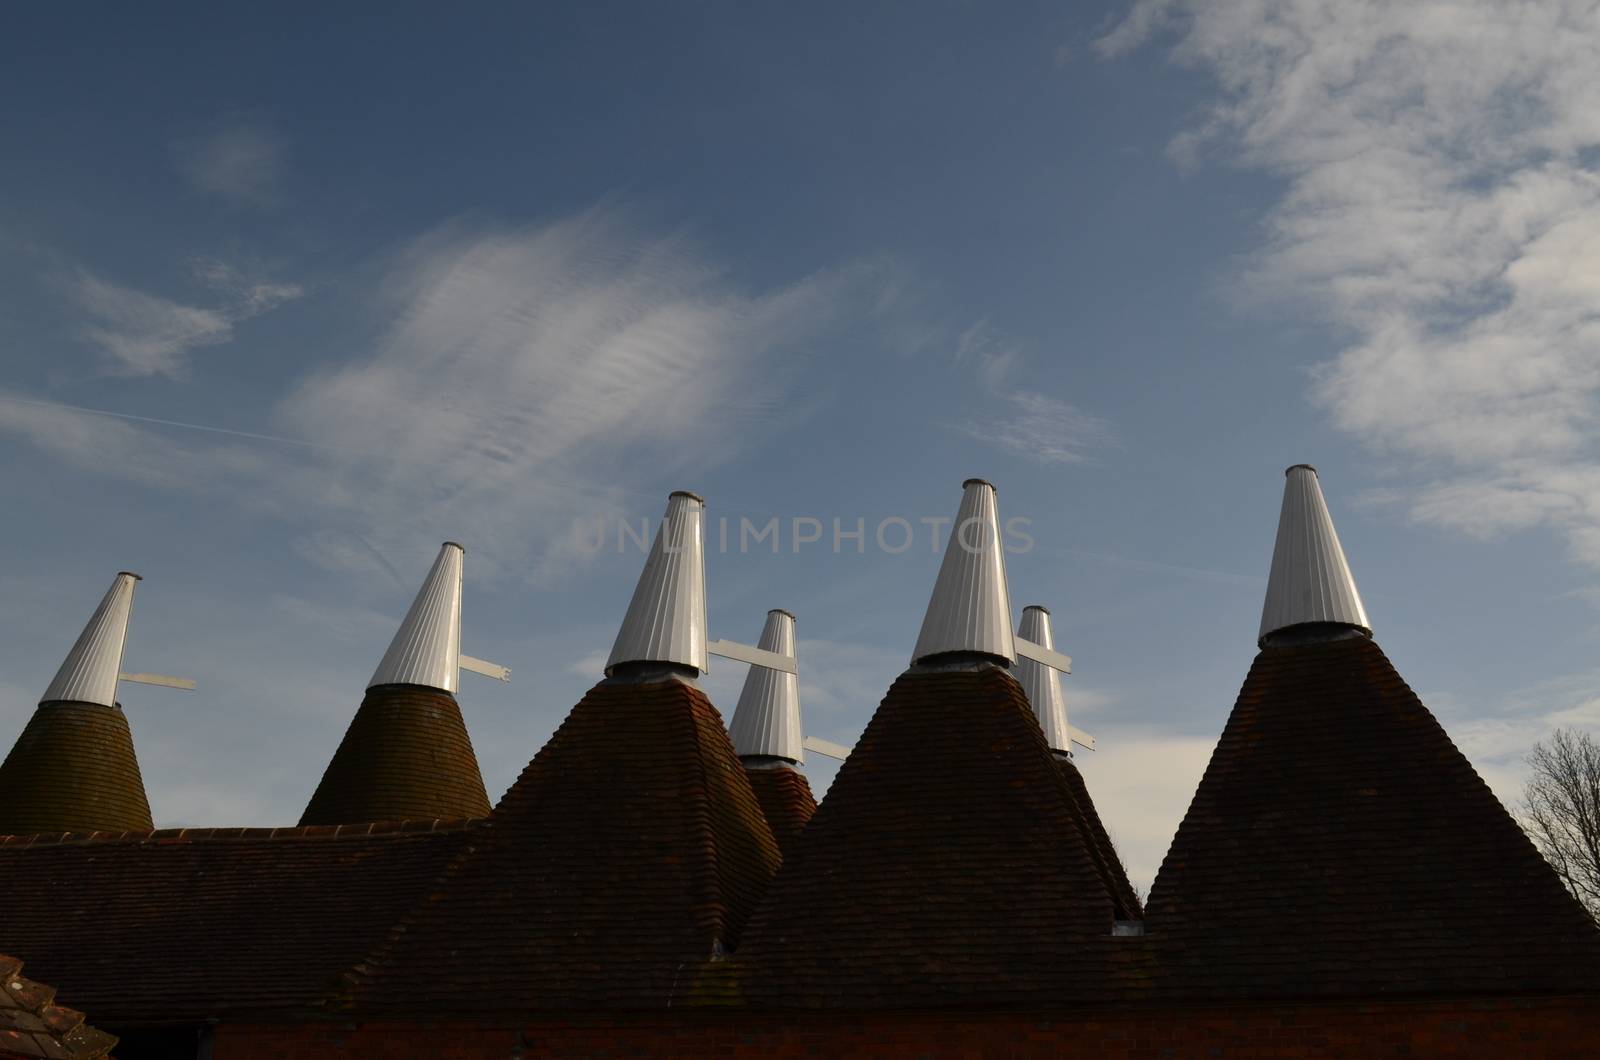 Oast House's. by bunsview